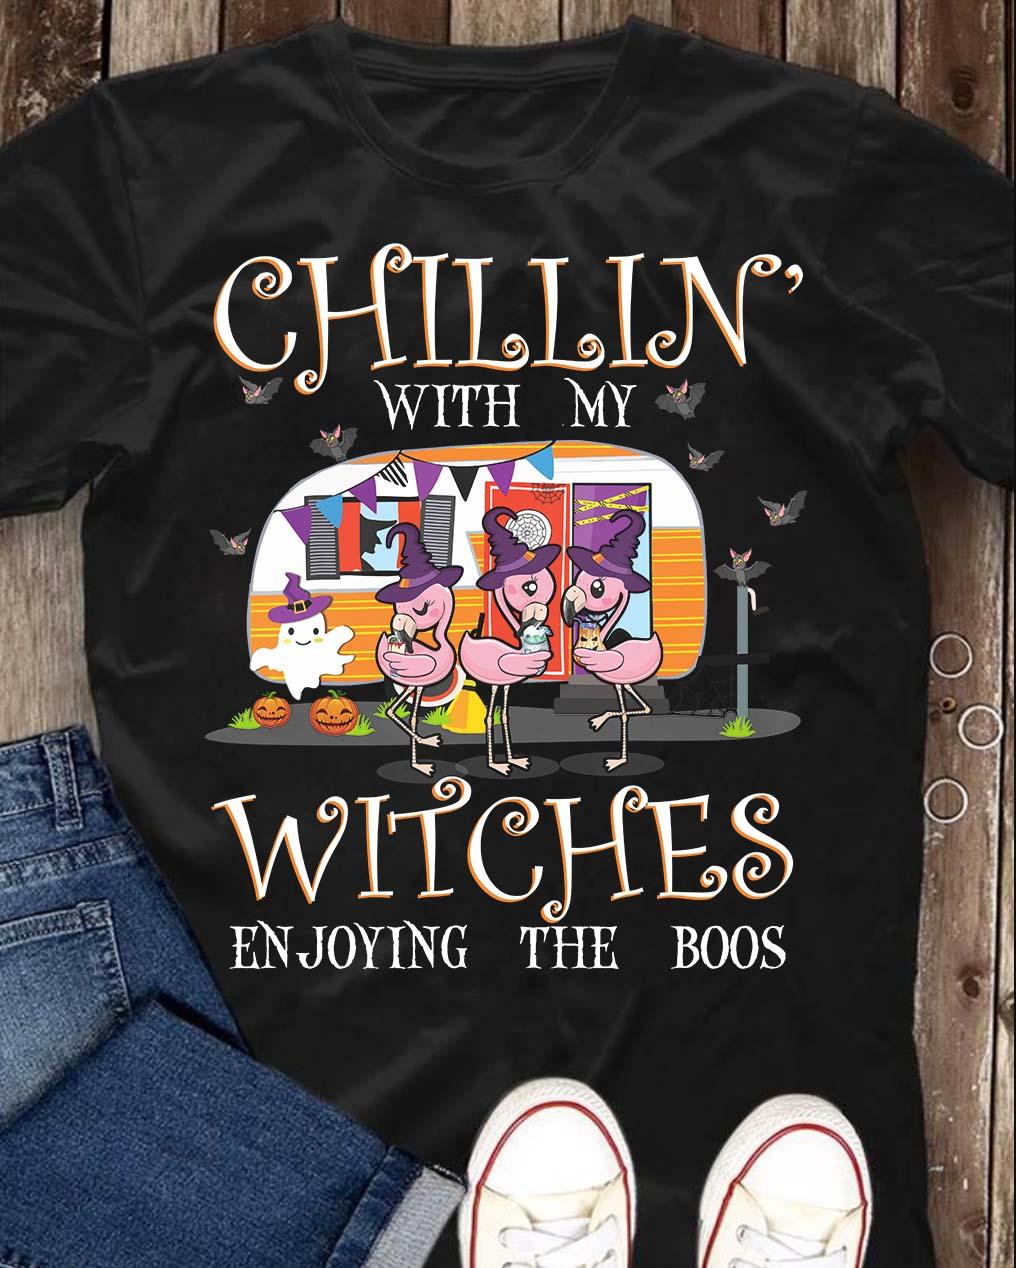 Halloween Camping Flamingo - Chilln' with my witches enjoying the boos